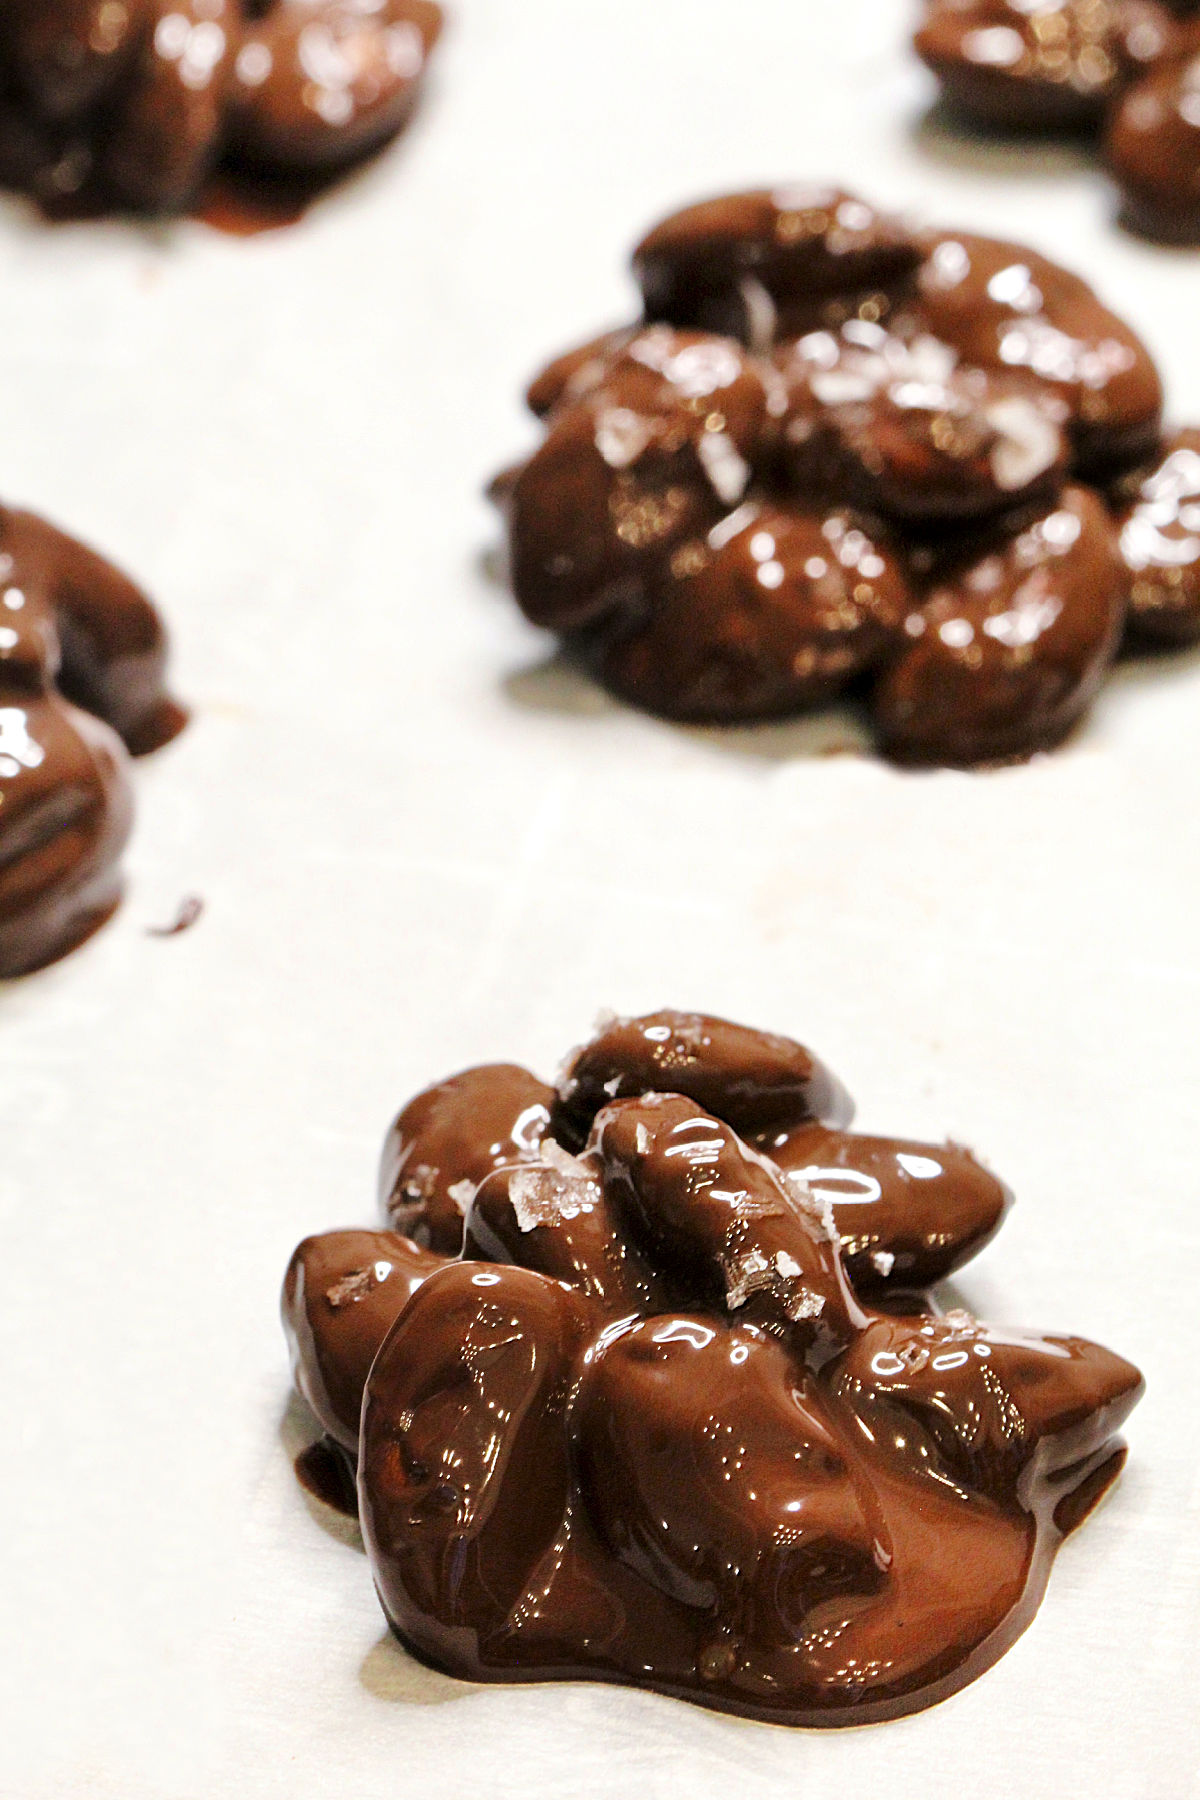 Chocolate almond clusters on wax paper.